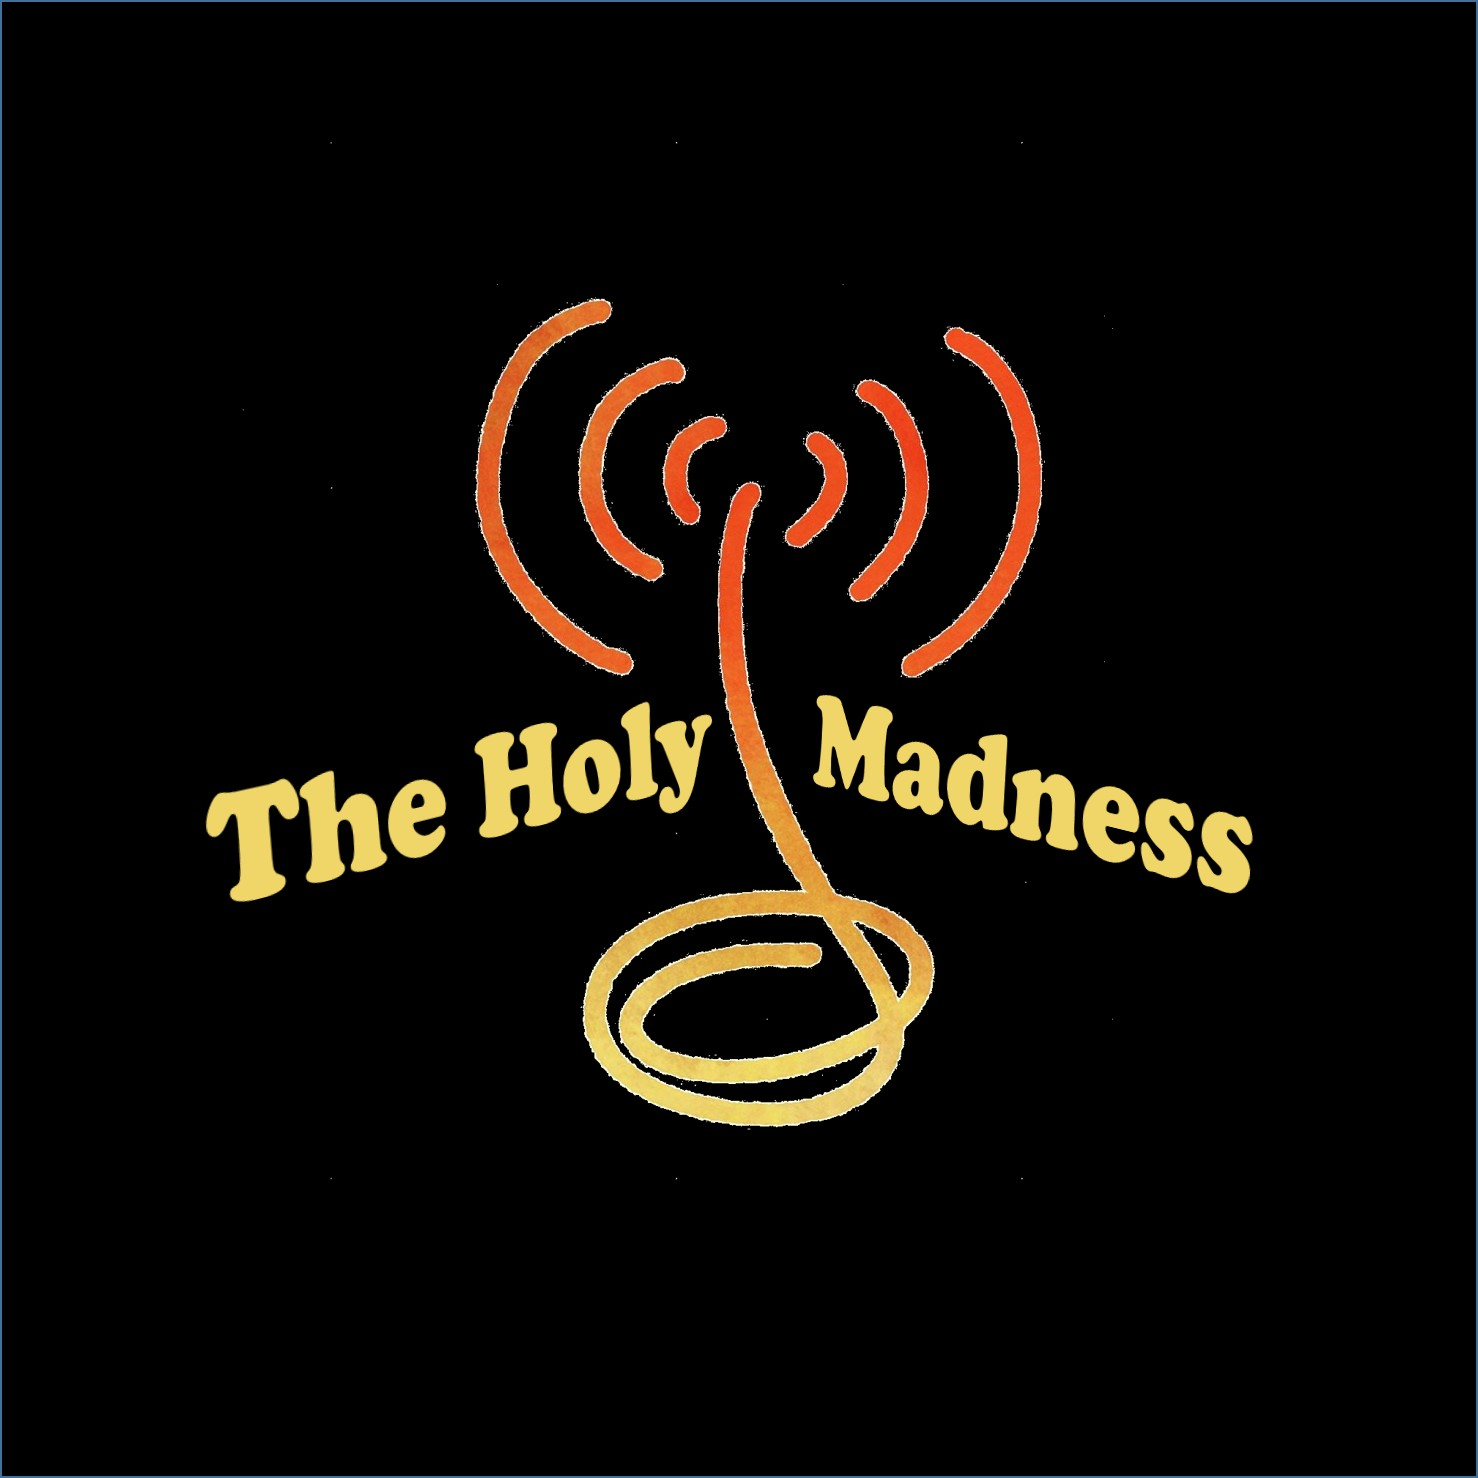 The Holy Madness